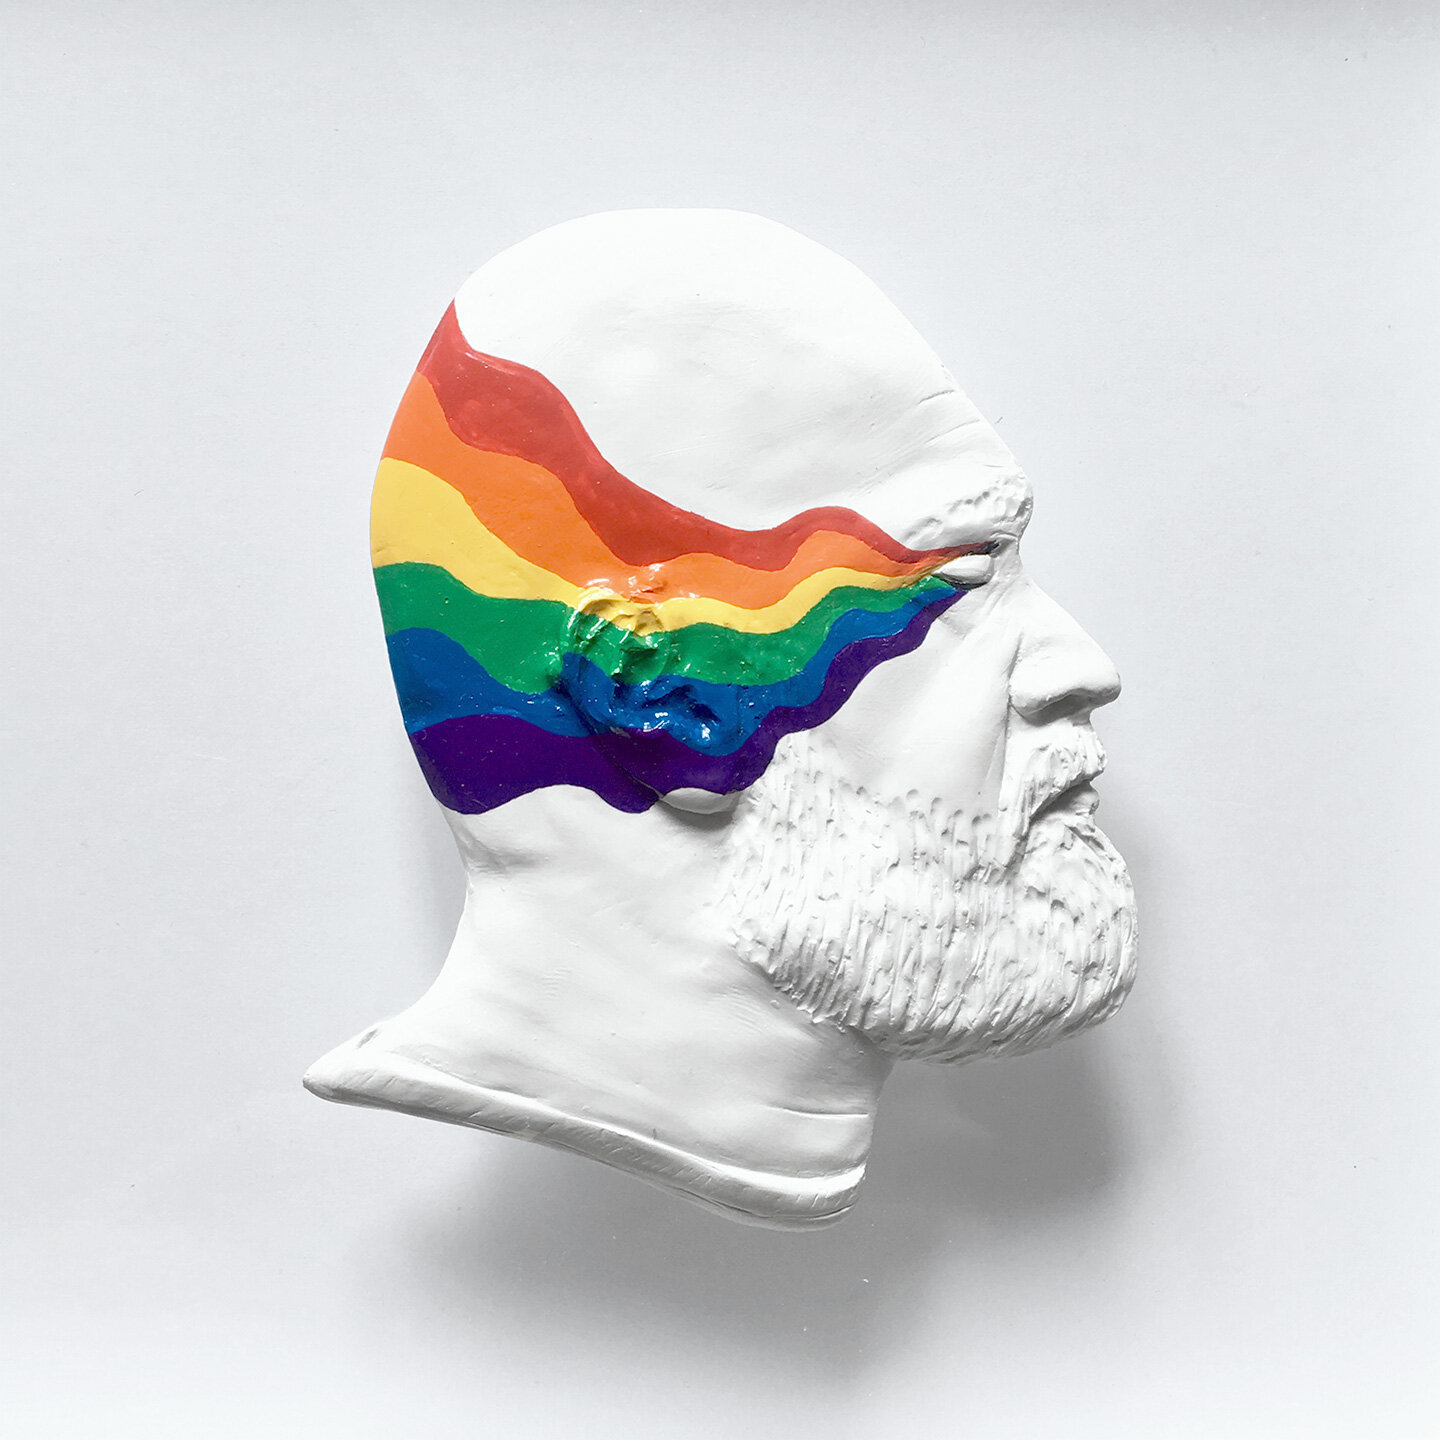 art_andre_levy_zhion_recovered_self_portrait_beard_rainbow_pride_lgbtq_queer_gay_OLD.jpg